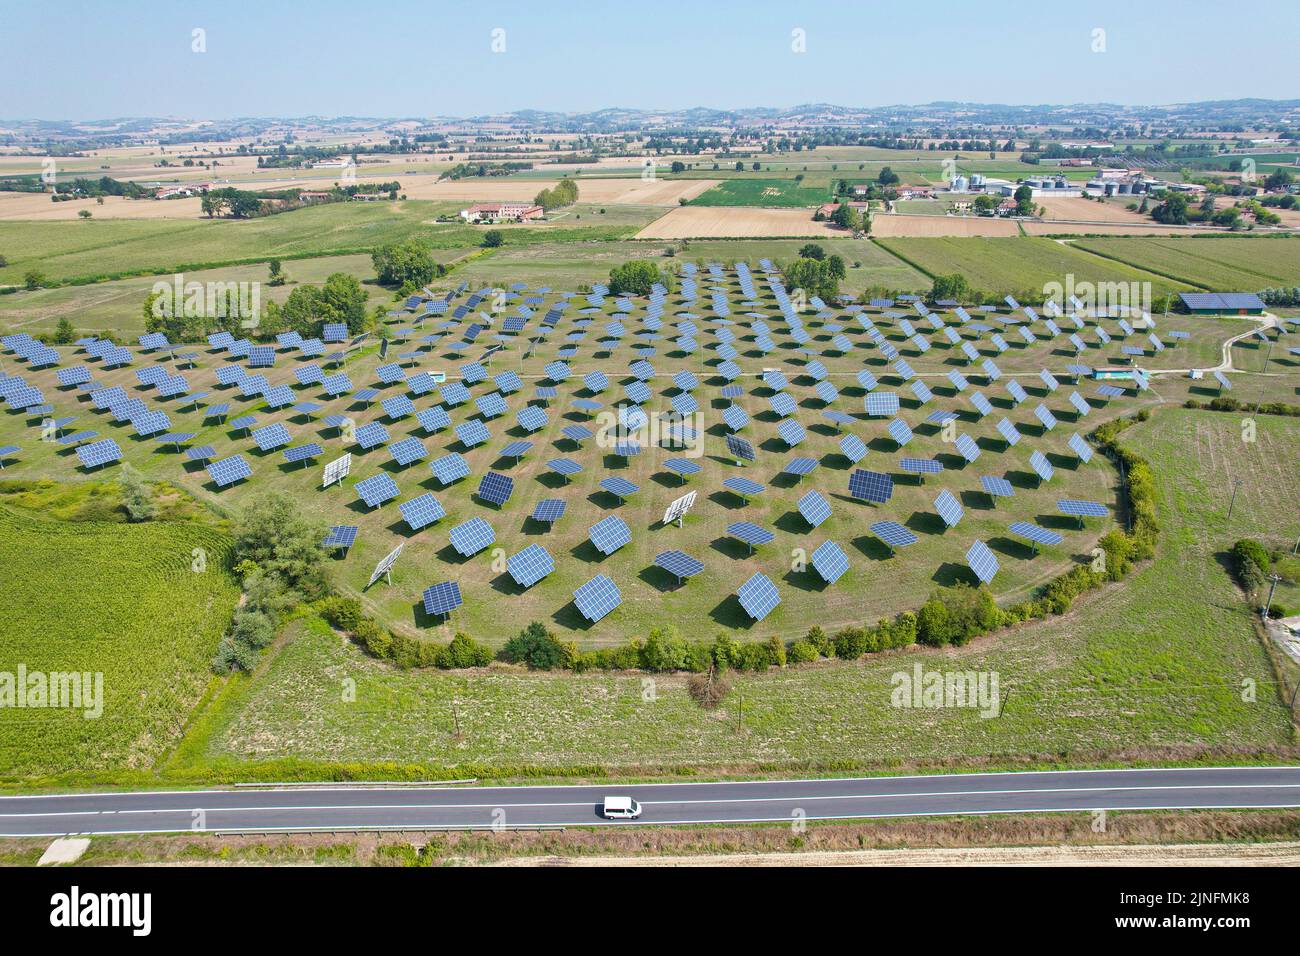 Silicon photovoltaic panels with defective single-axis tilted track system In a small solar power plant. Alessandria, Italy - August 2022 Stock Photo